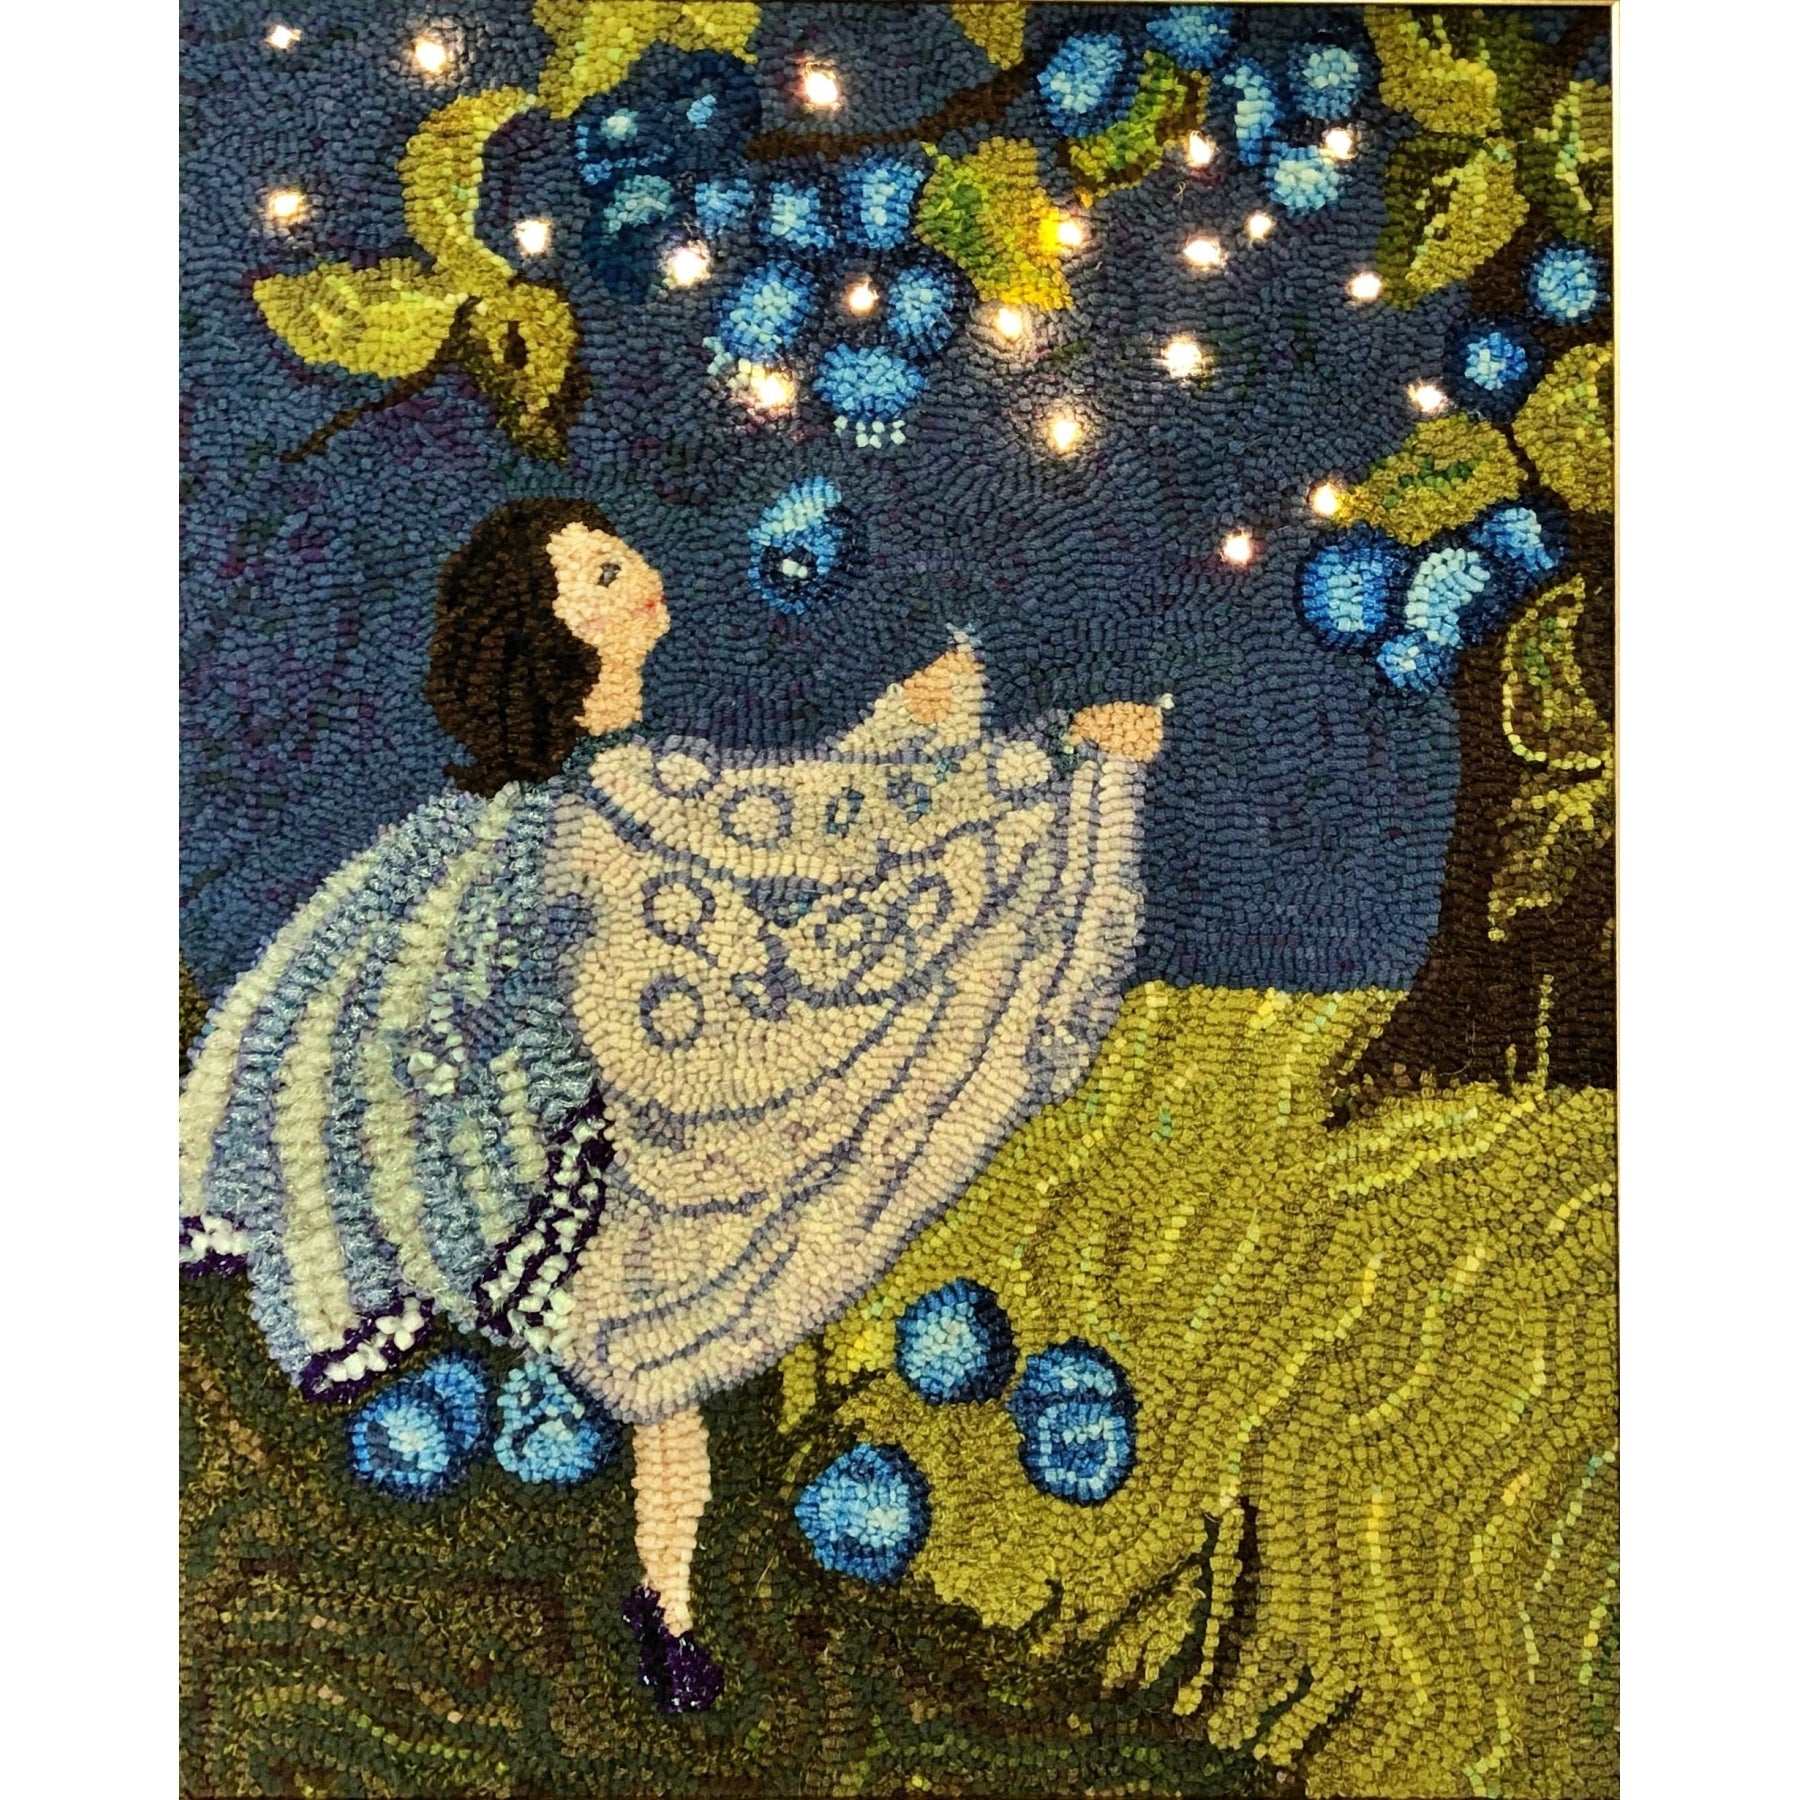 Blueberry Fairy, rug hooked by Janet Williams